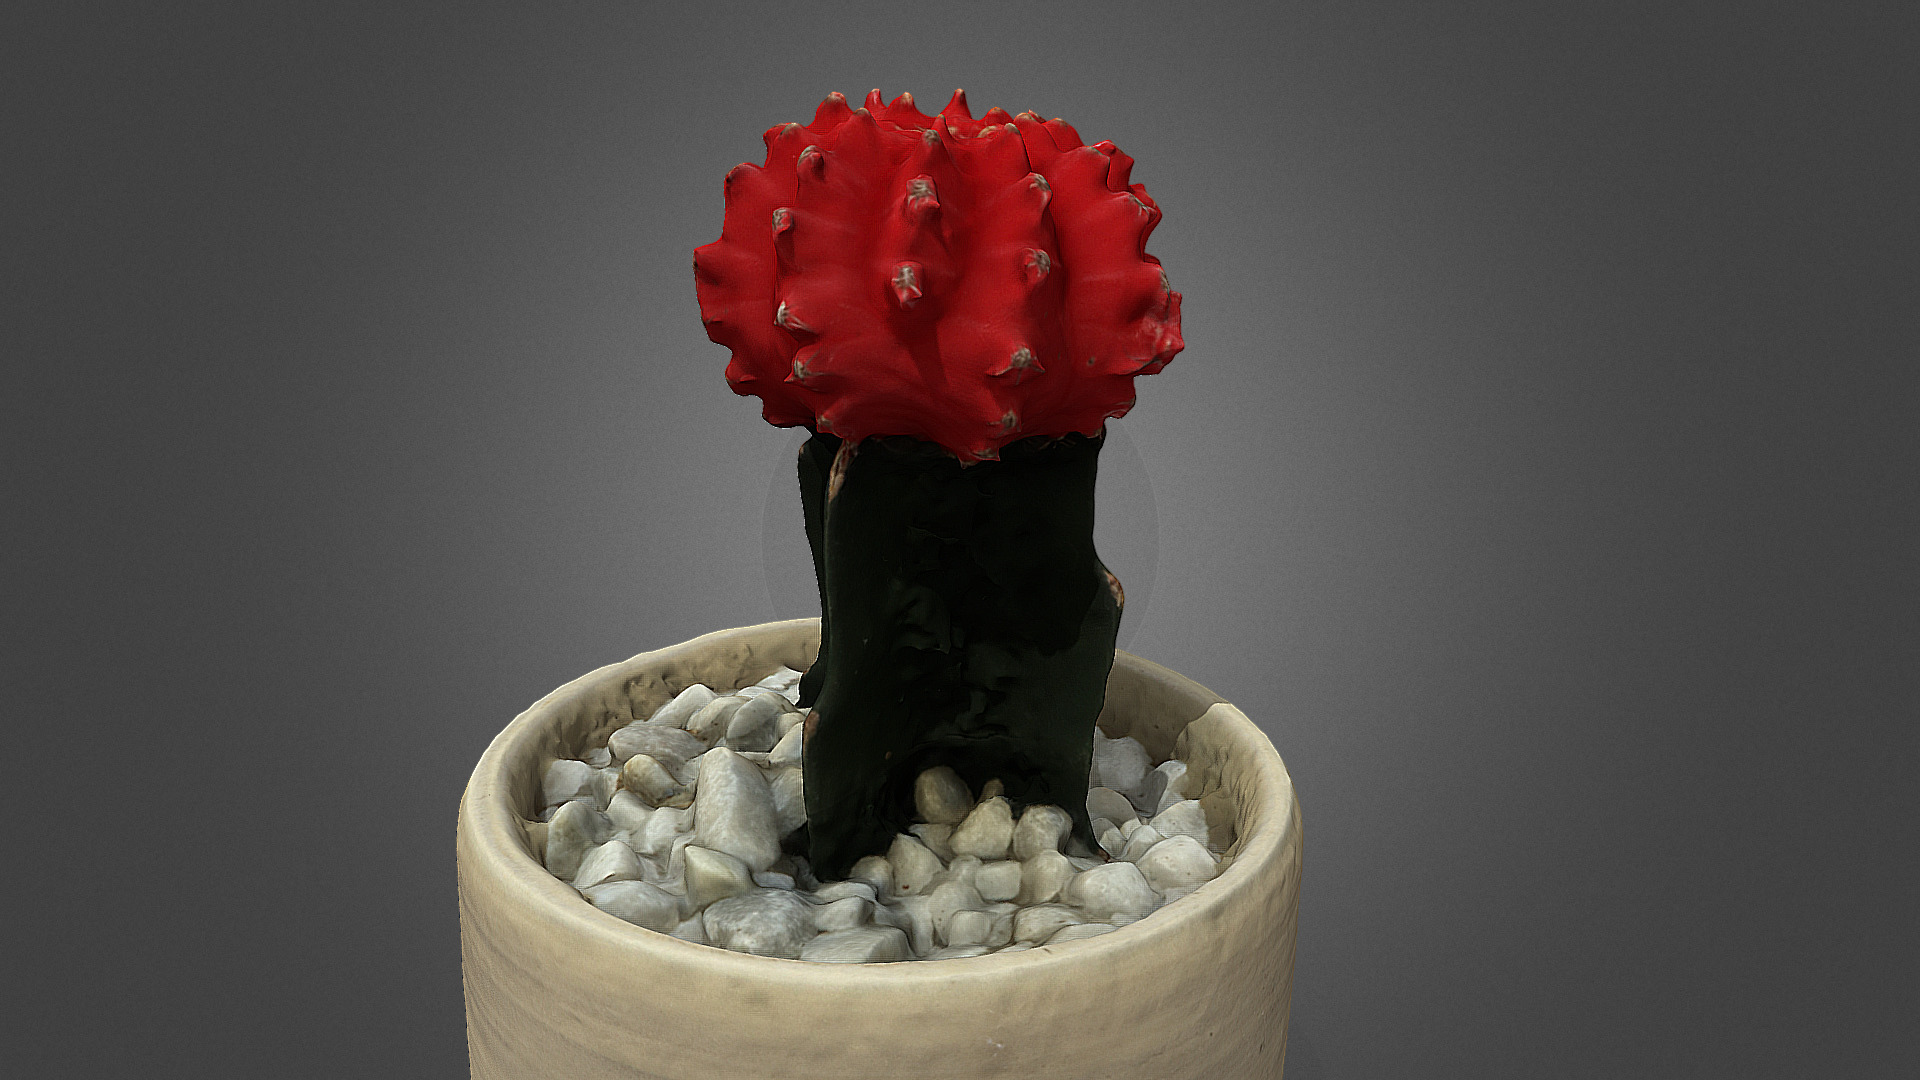 3D model Potted Cactus - This is a 3D model of the Potted Cactus. The 3D model is about a rose on a cake.